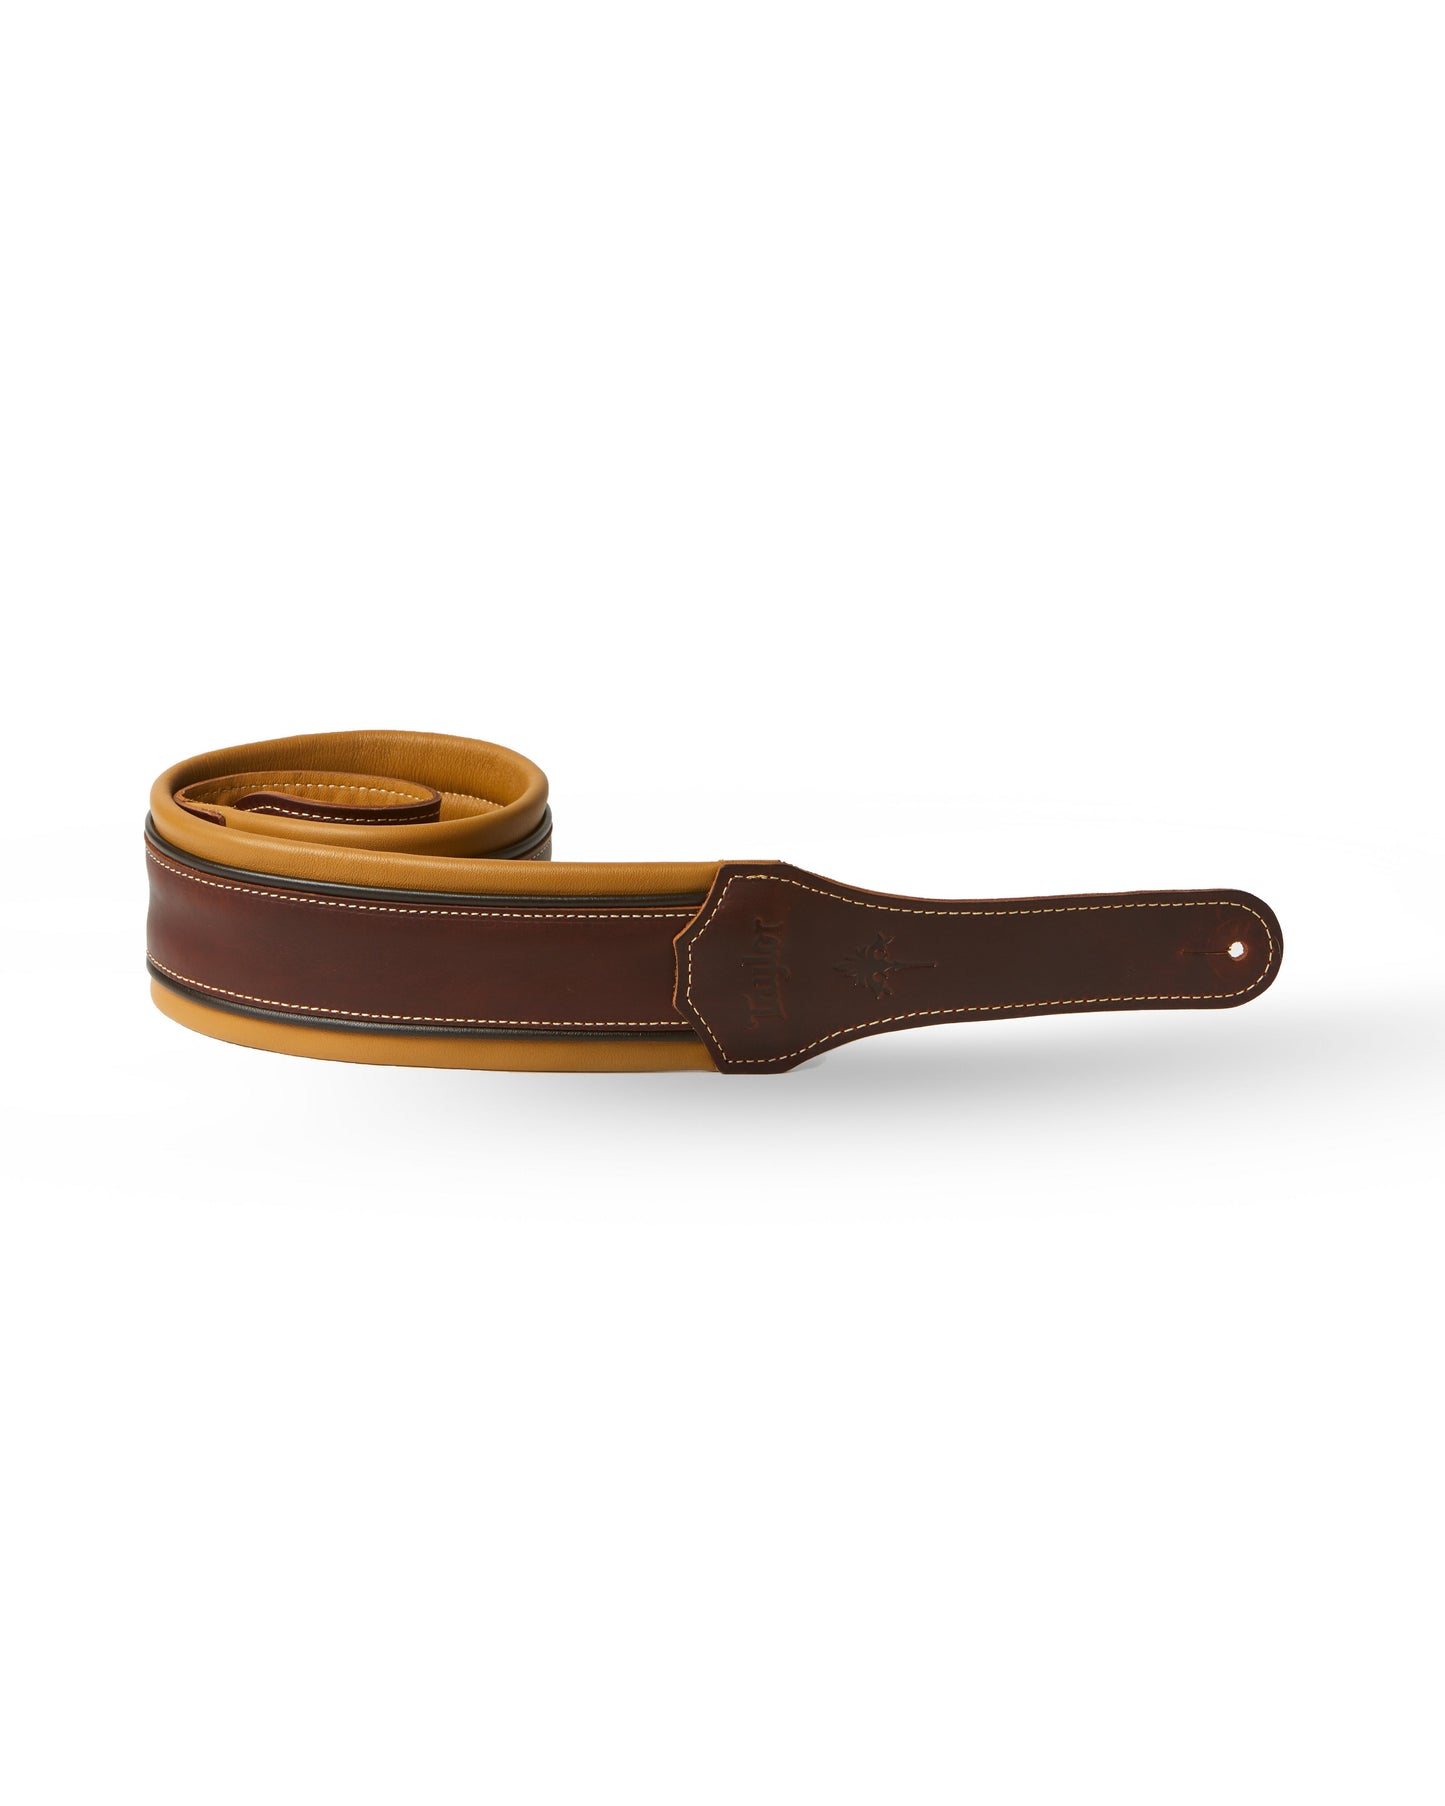 Image 1 of Taylor Ascension 3" Leather Guitar Strap, Cordovan/Black/Butterscoth - SKU# 9300-04 : Product Type Accessories & Parts : Elderly Instruments